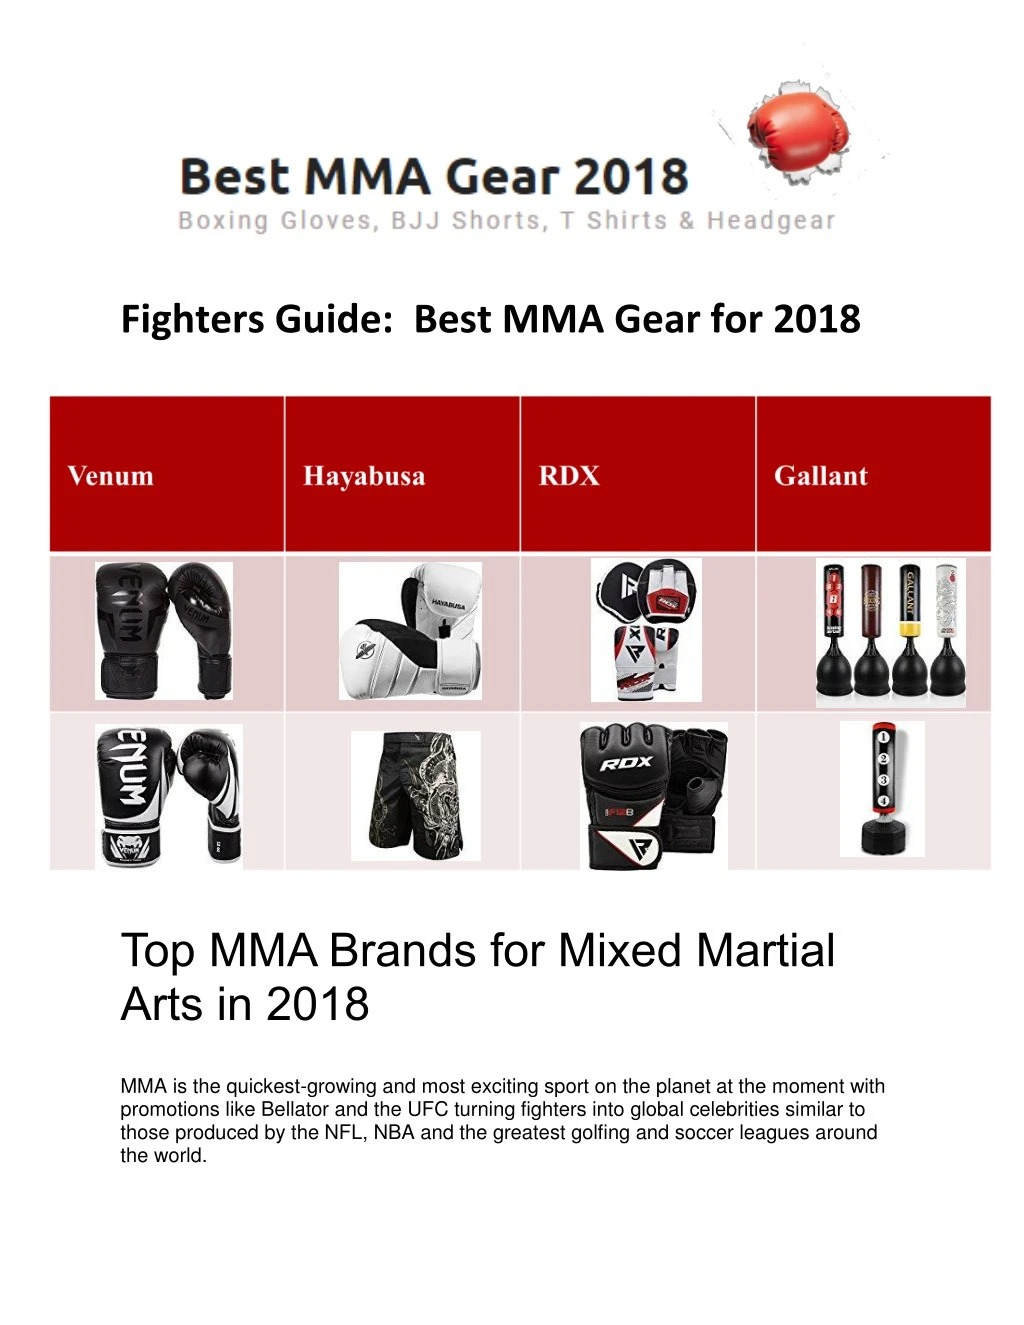 fighters guide best mma gear for 2018